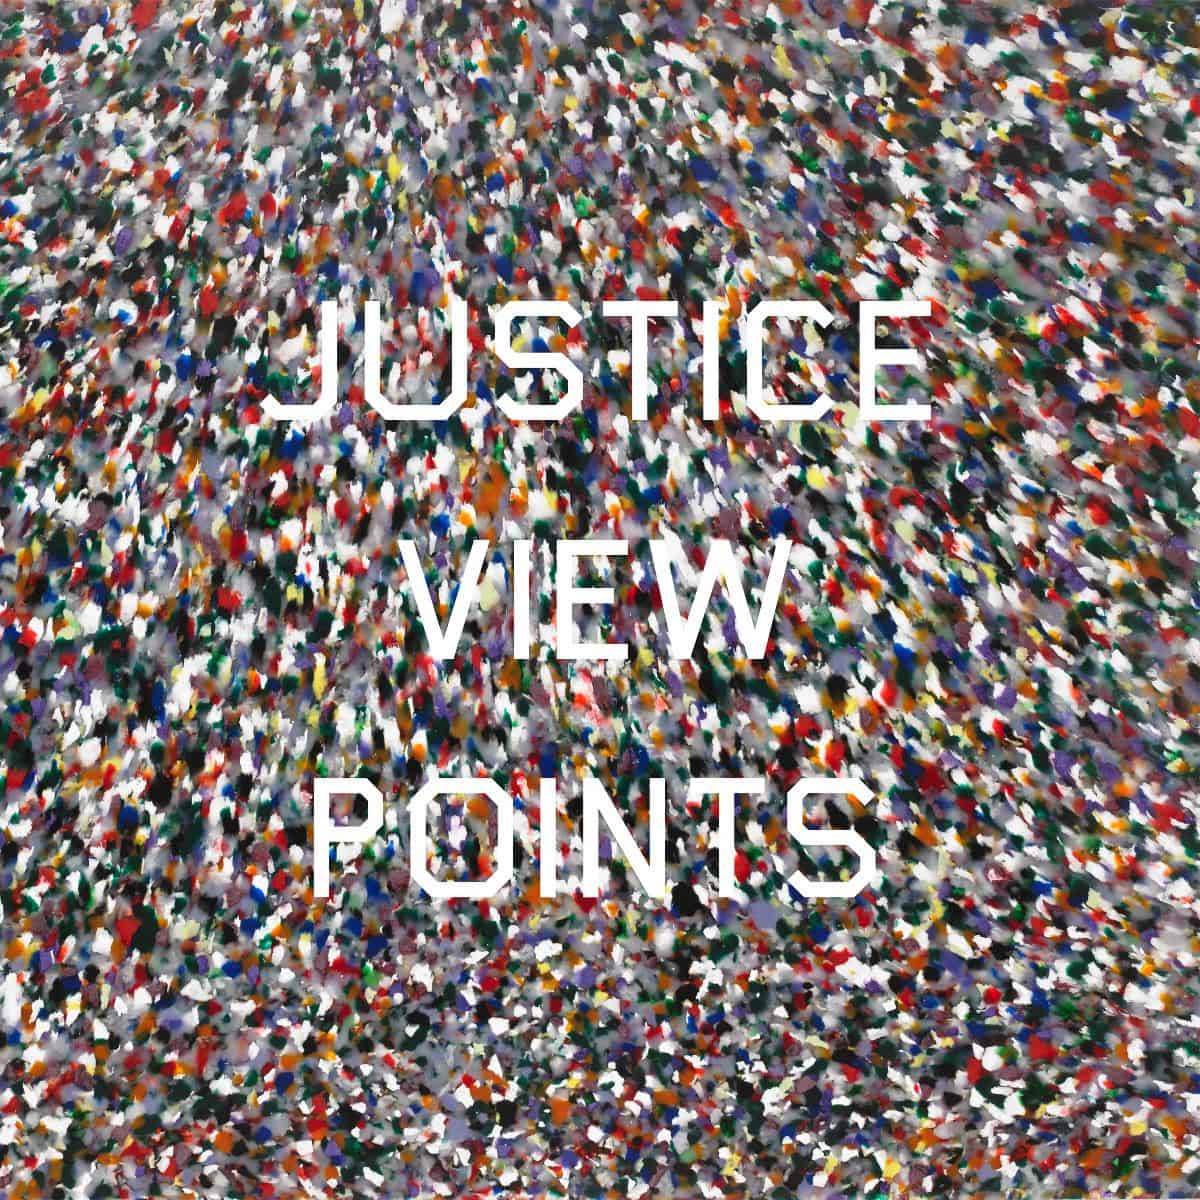 Justice - Viewpoints (Hydrogen Dukebox)